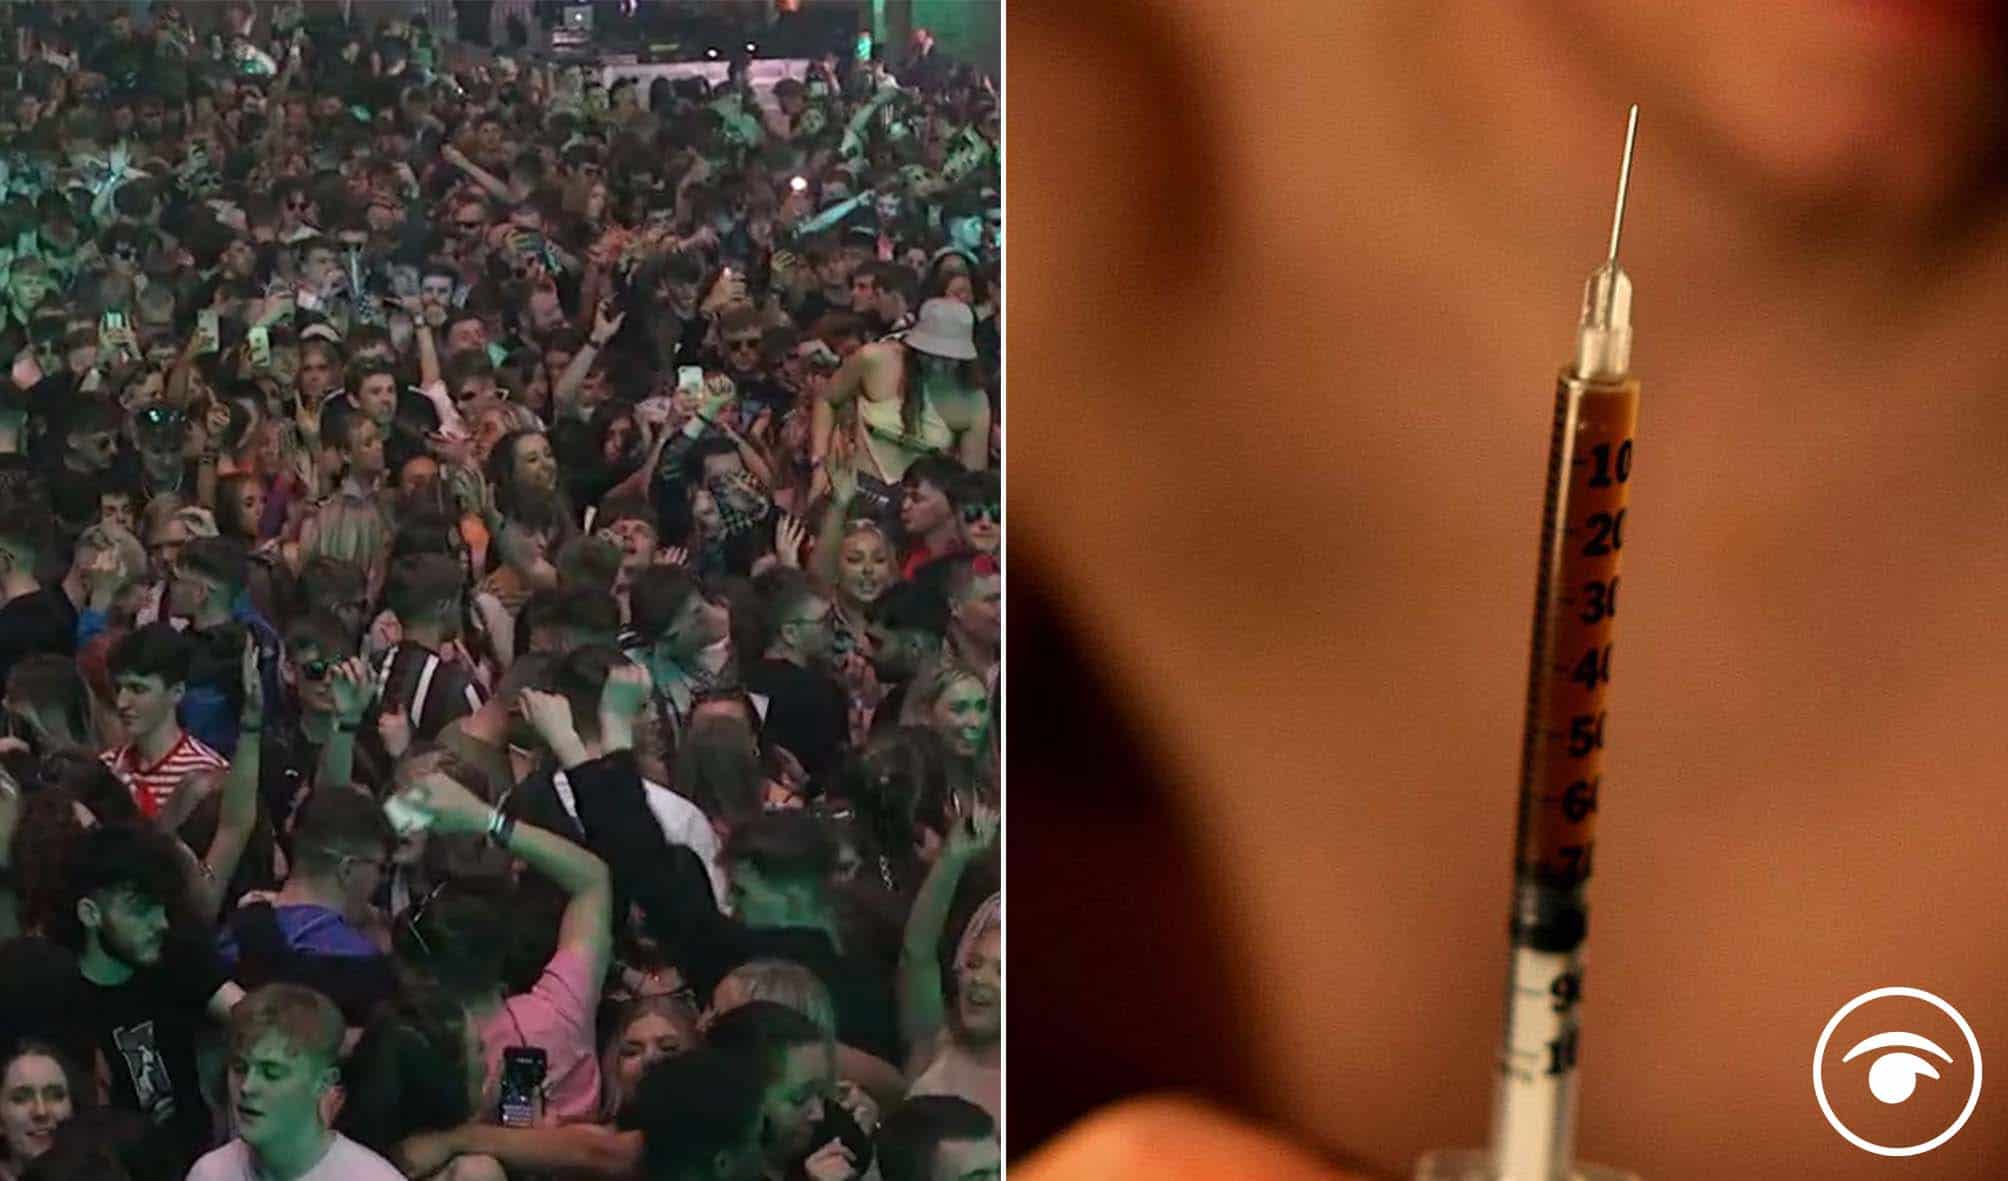 ‘Absolutely disgusting:’ Student fears she was injected with needle as spiking reports rise